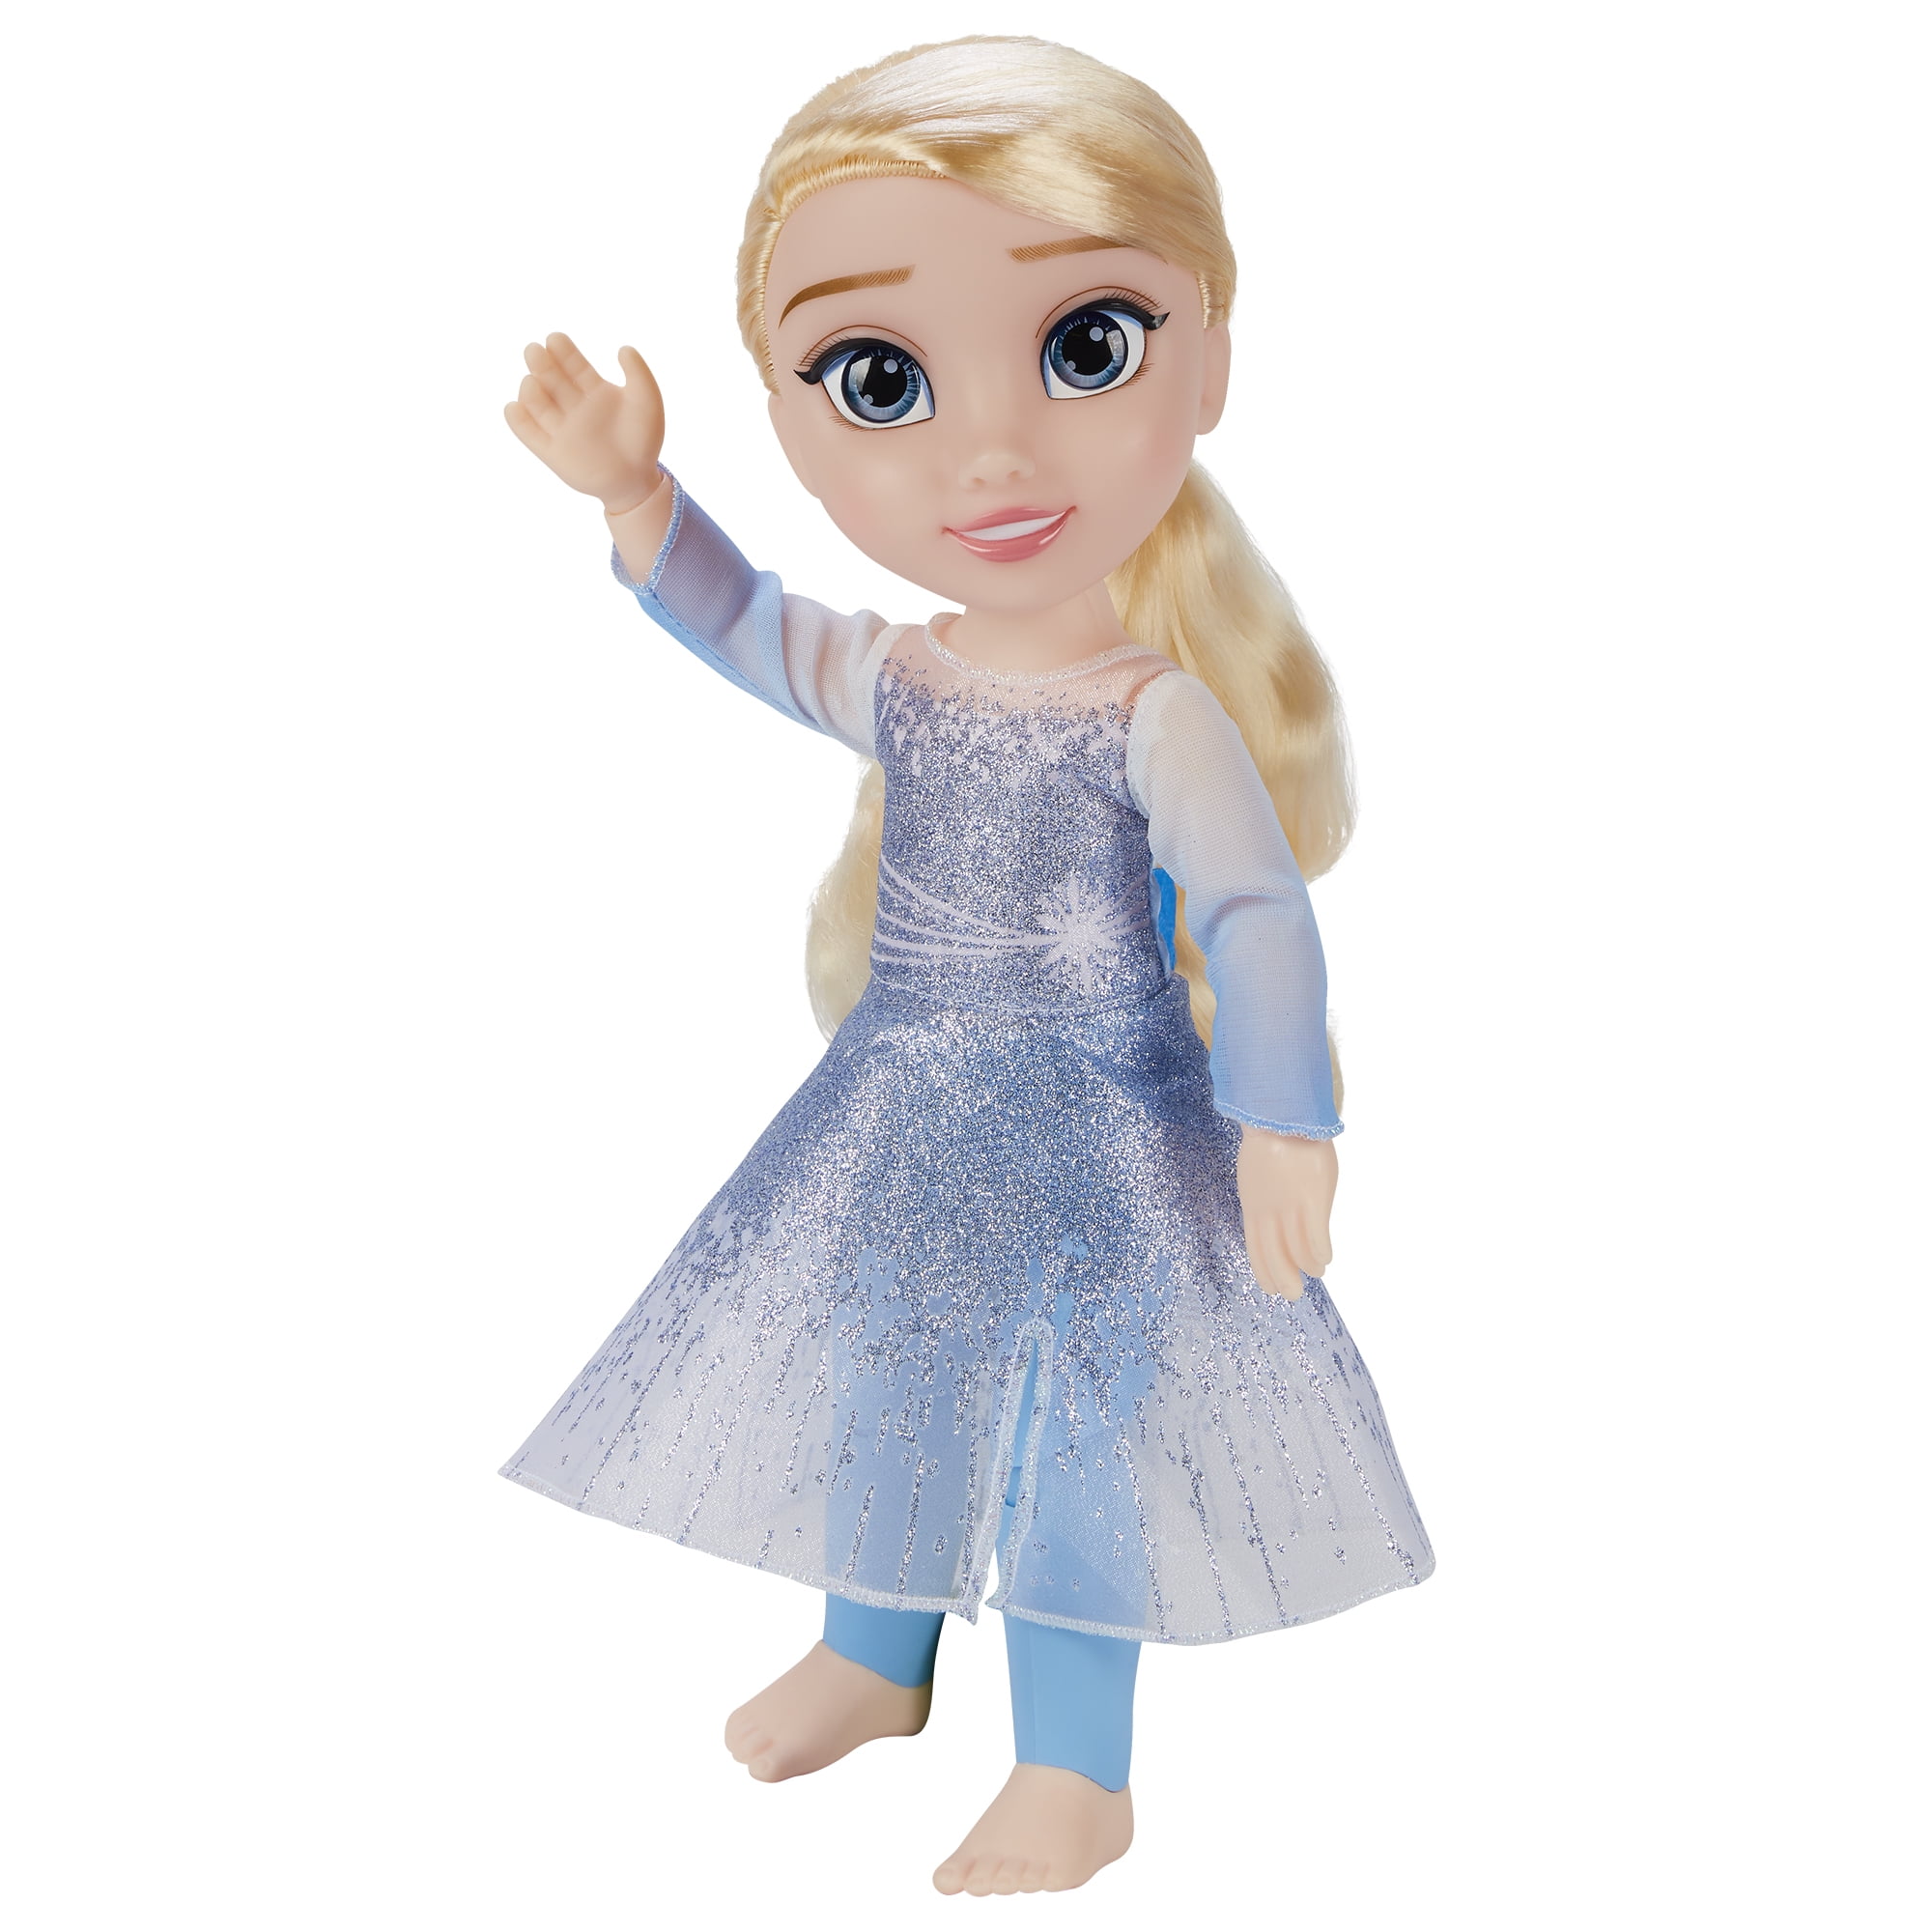 Frozen Toy Camera That Lights Up And Shows Pictures Of The Movie Characters. 